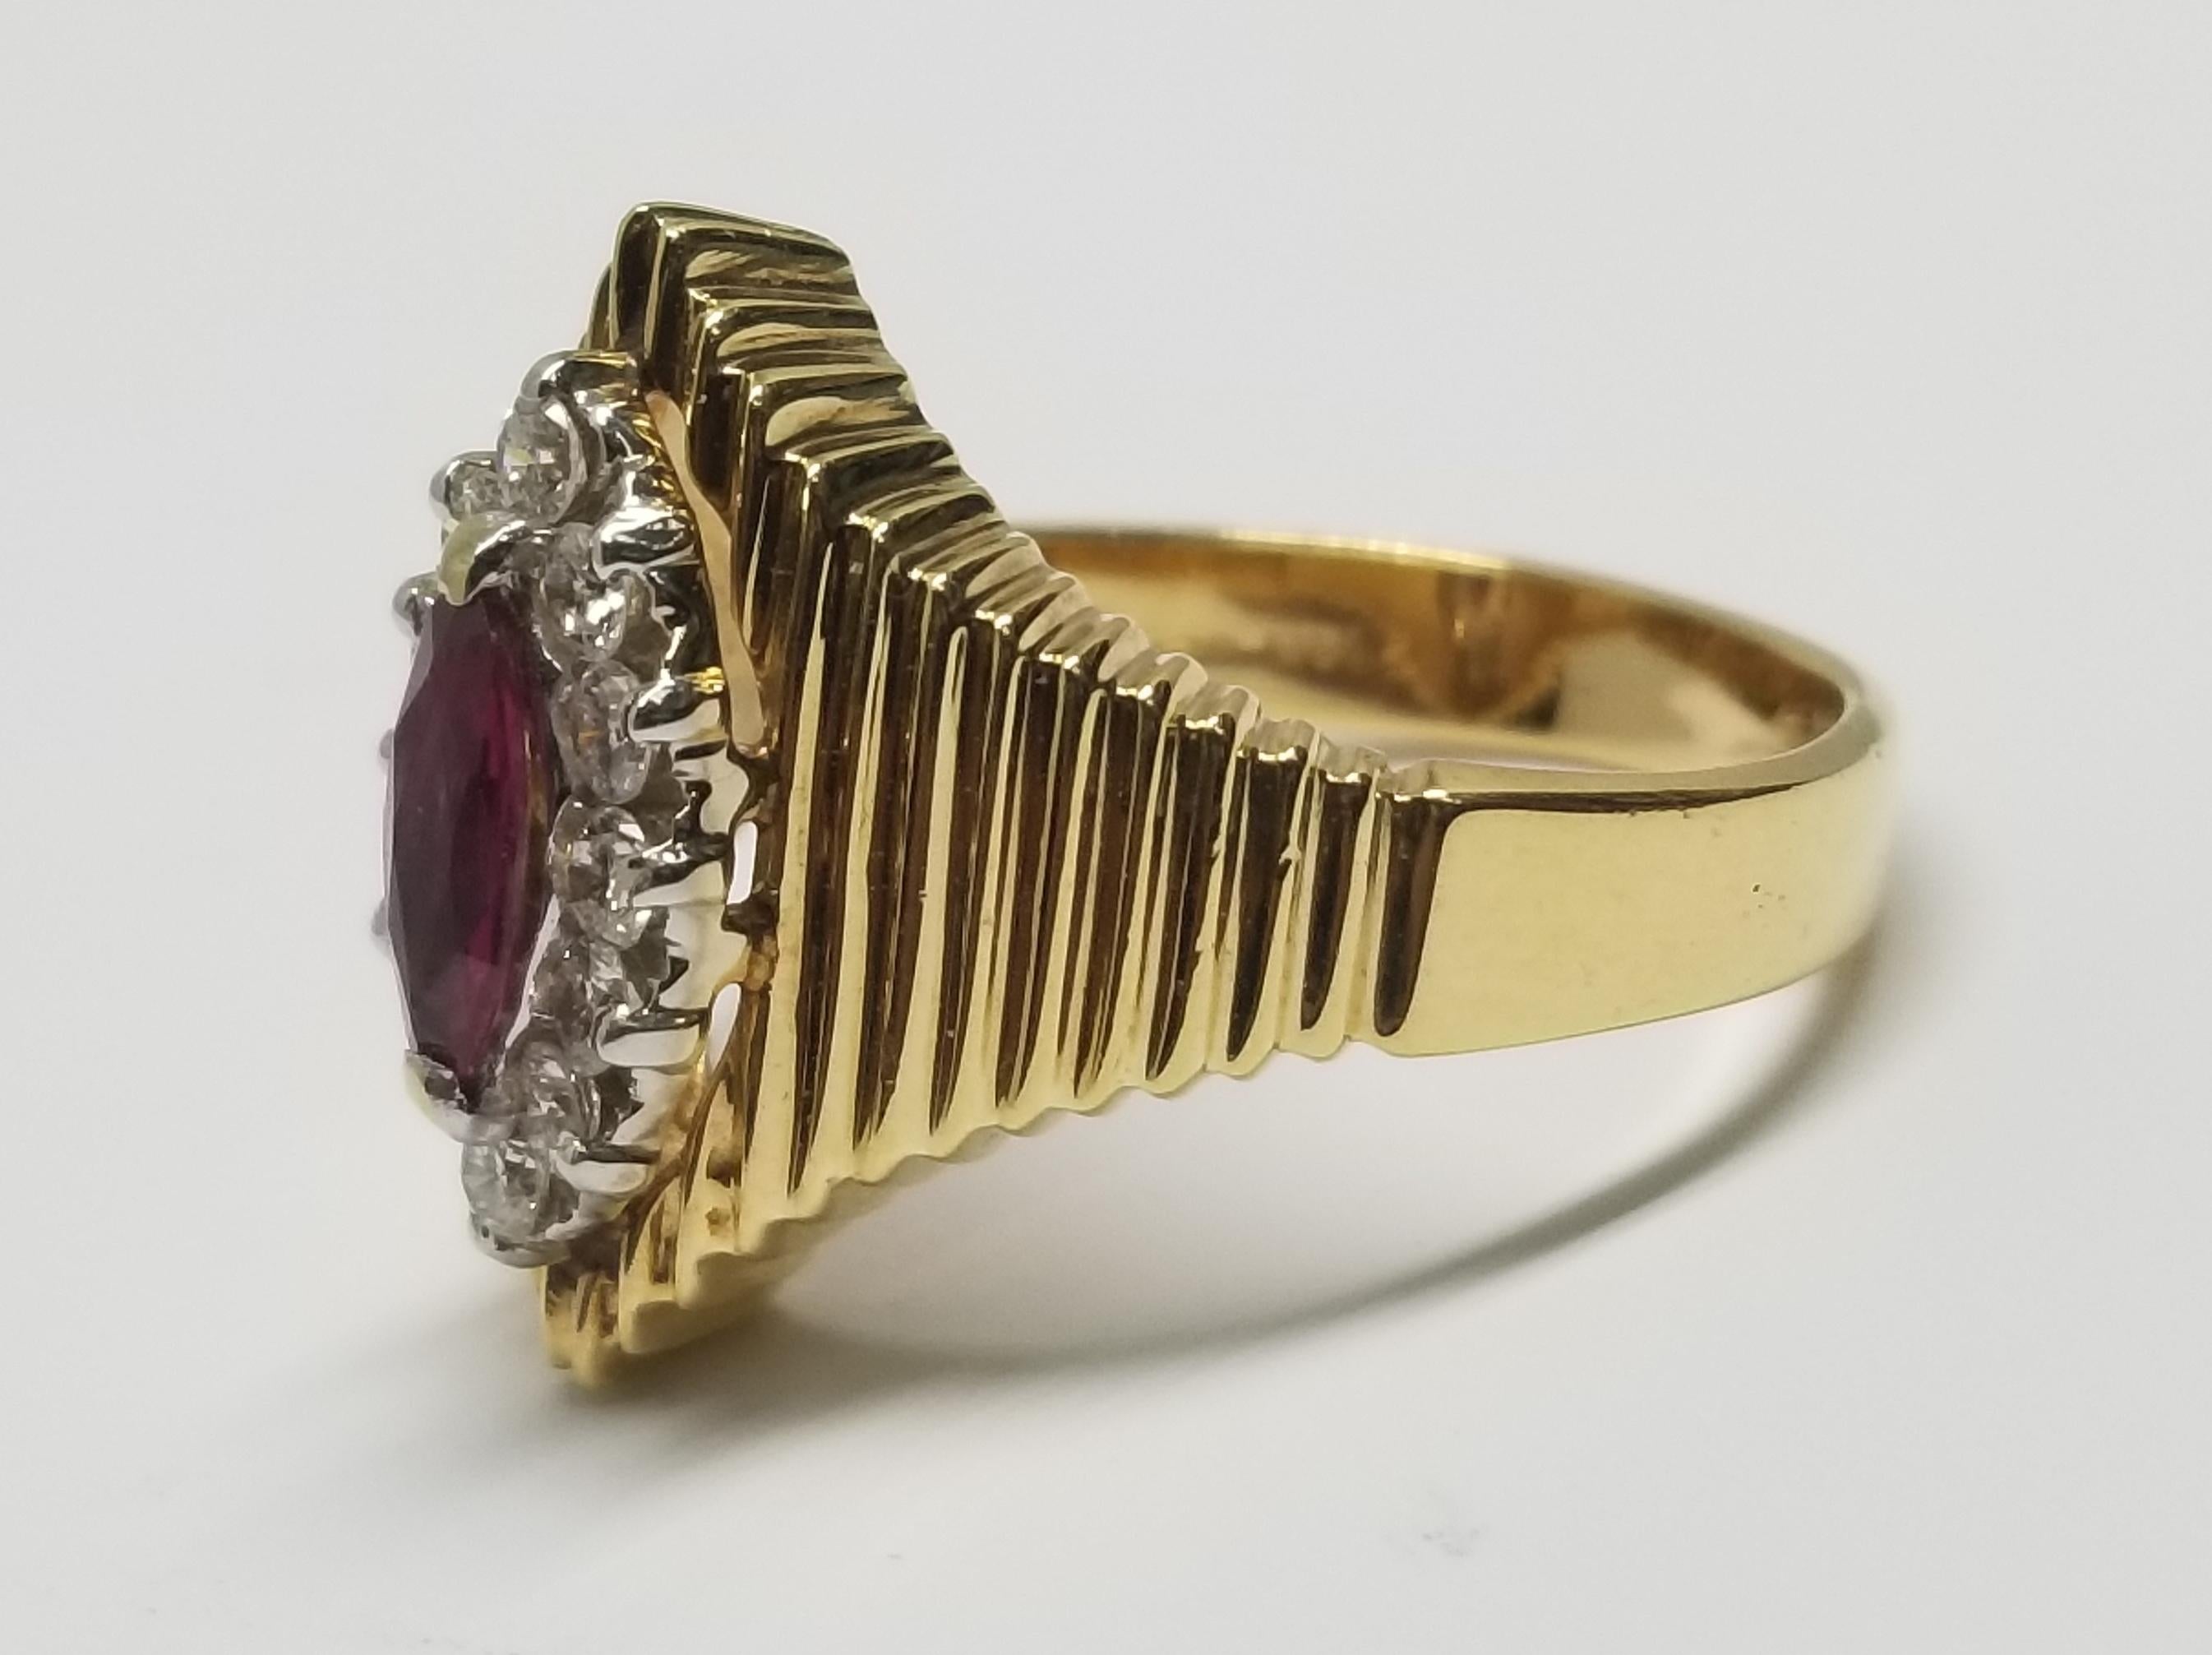 14k yellow gold ruby and diamond ring, containing 1 marquise cut ruby weighing .40pts. and 12 round full cut diamonds of very fine quality weighing .40pts. on a ribbed band.  This ring is a size 6 but we will size to fit for free.